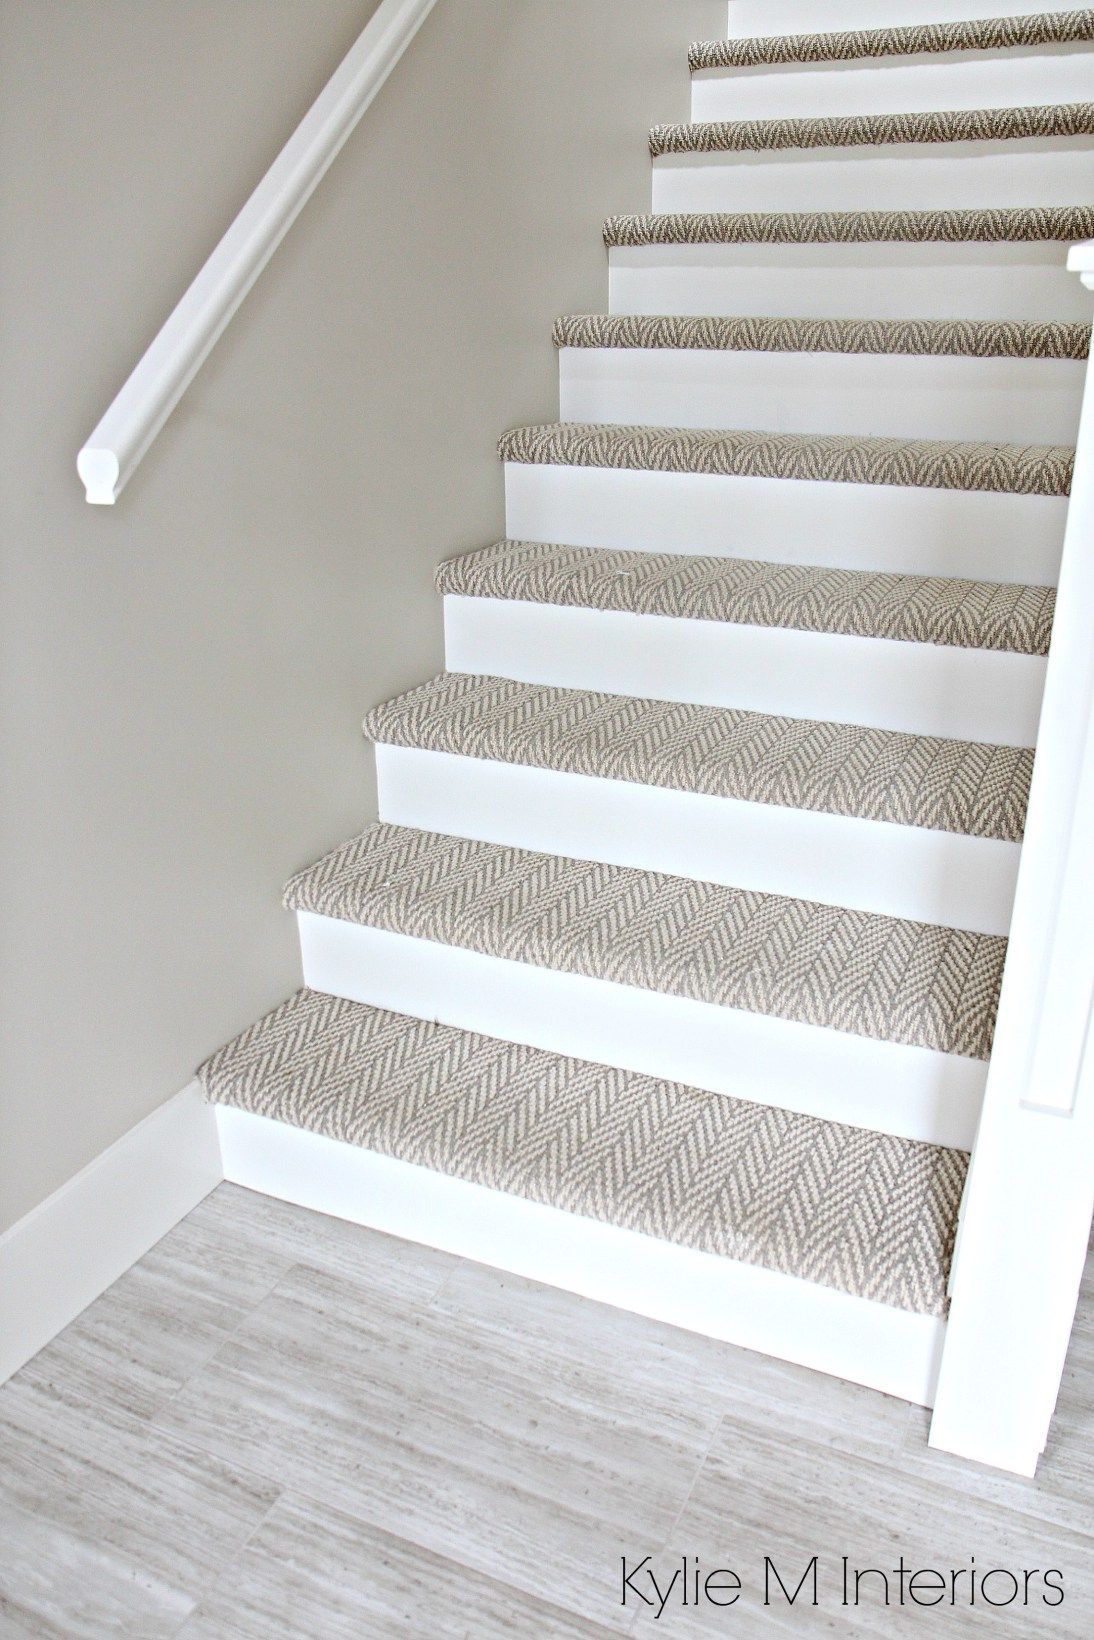 Stairs with carpet herringbone treads and painted white risers, looks like  a runner. Benjamin Moore Edgecomb Gray on stairwell wall.